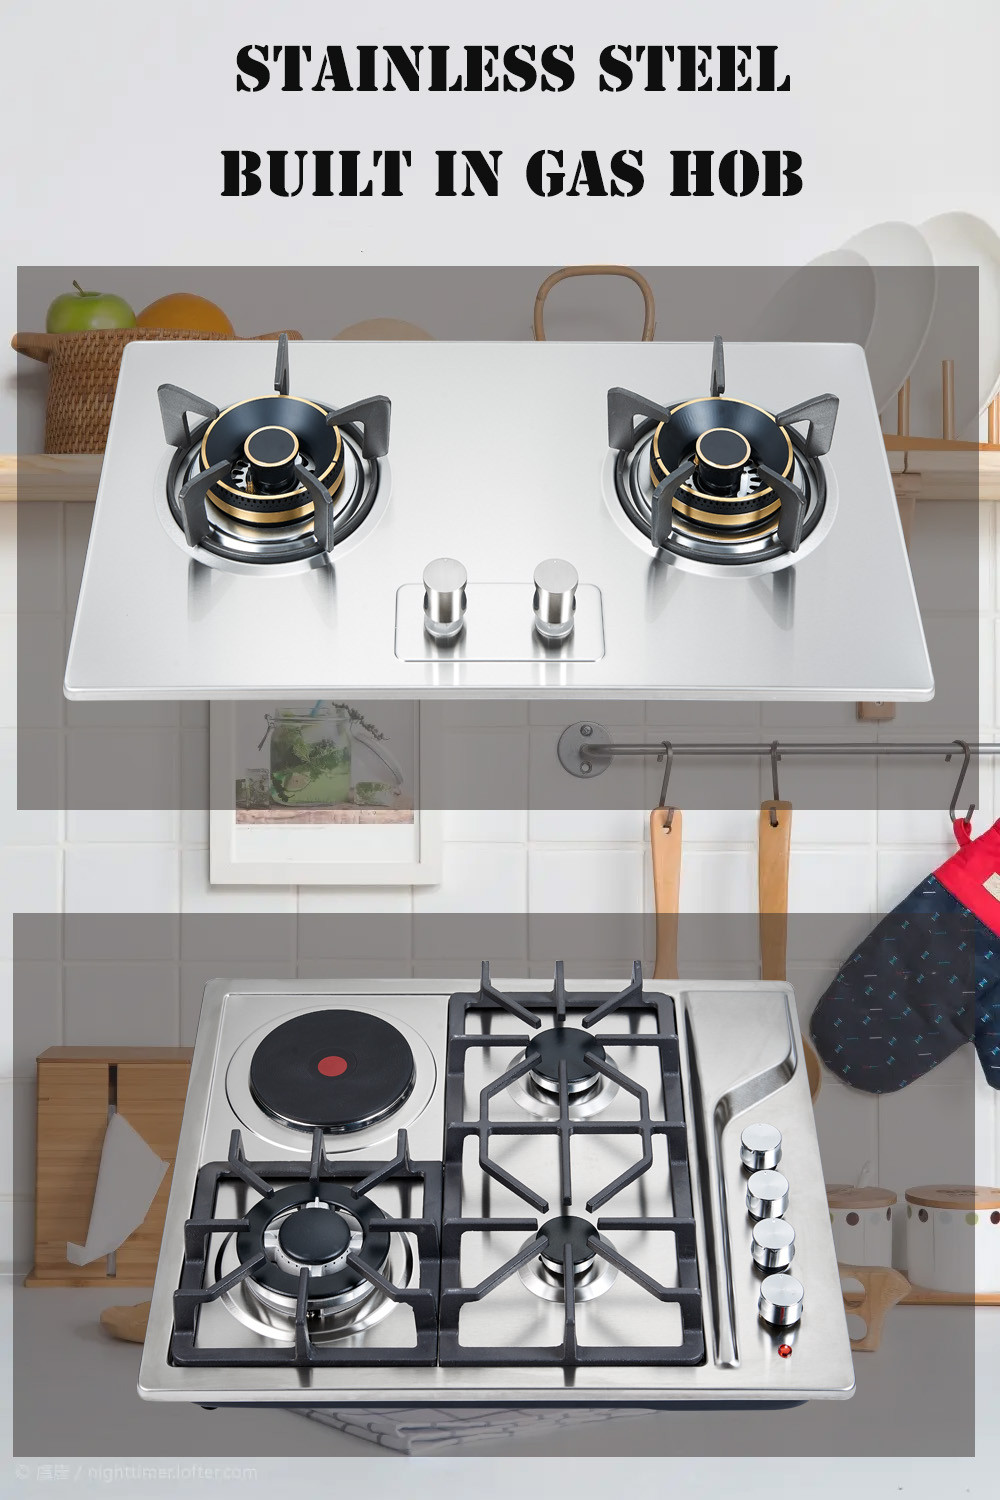 CHEFF Catalog - Stainless Steel Built-in Gas Hob